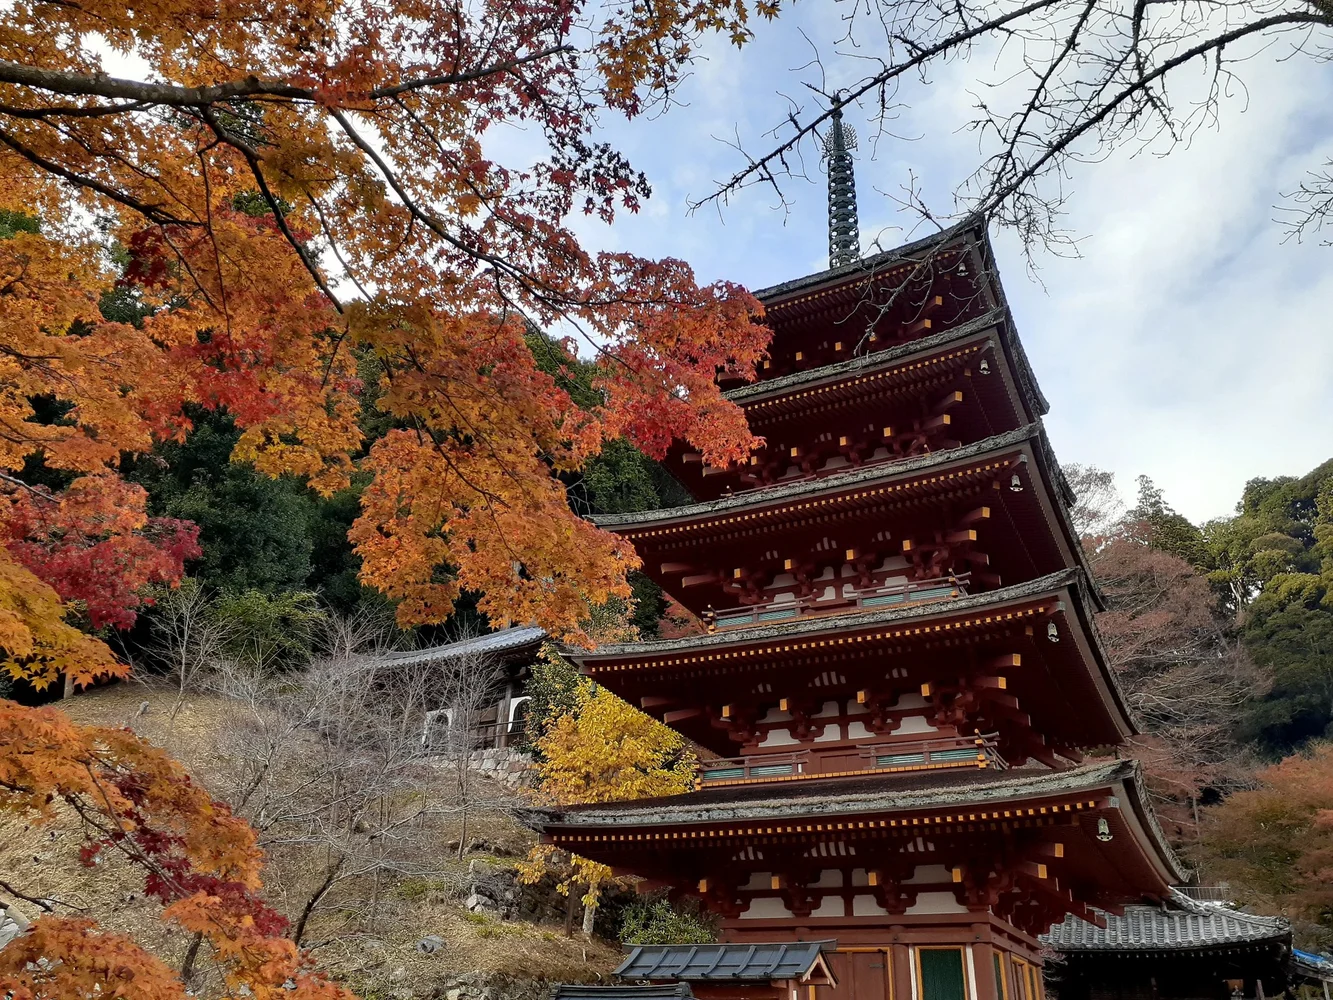 Visit deep spiritual sites in Nara with a local guide!